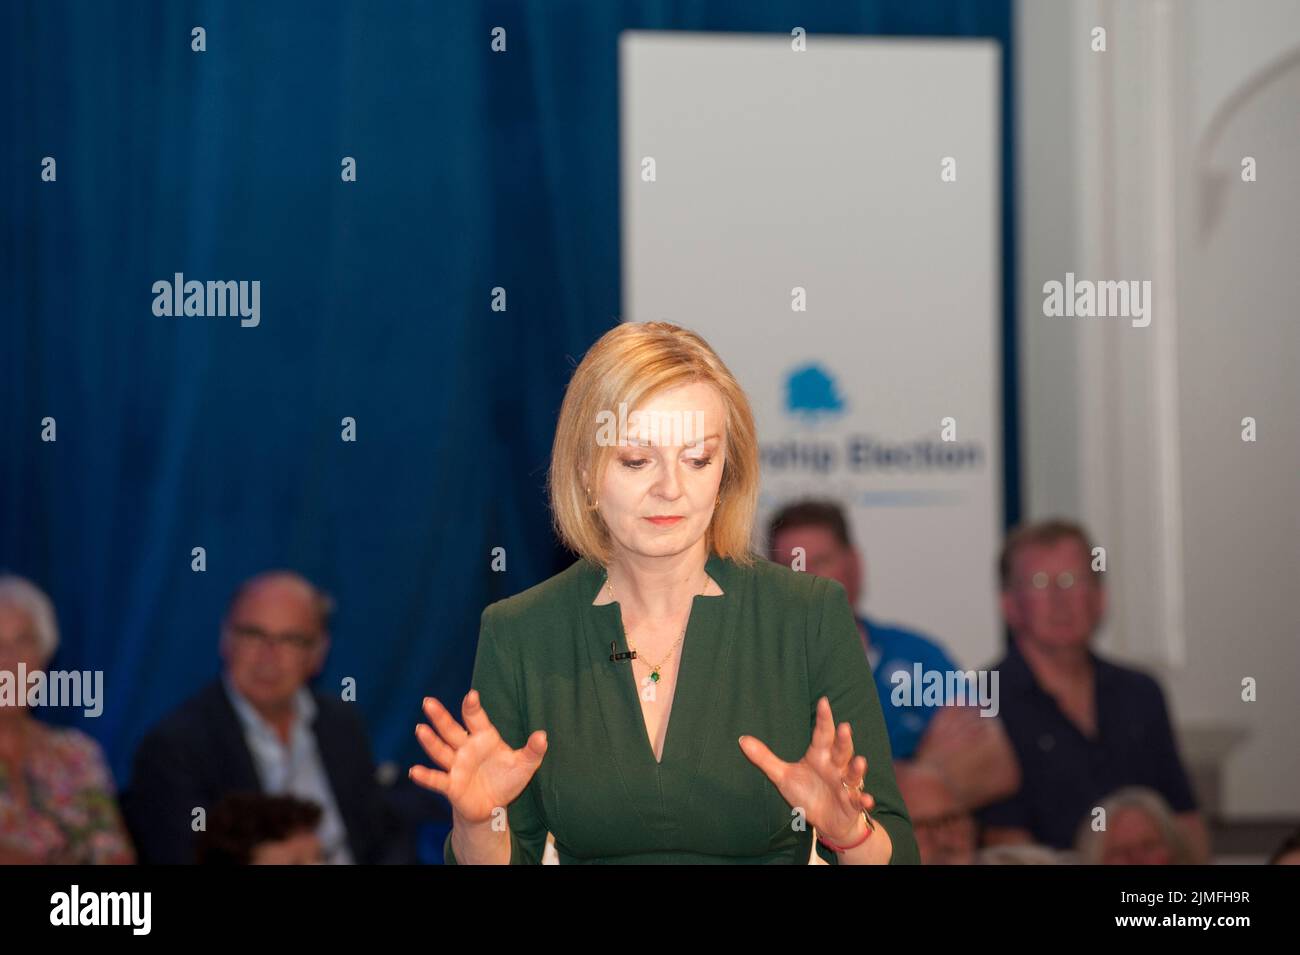 Liz Truss, Foreign Secretary and MP for South West Norfolk, in Eastbourne to face questions from Conservative party members. Part of cross country hustings campaigning to replace Boris Johnson as Party Leader and Prime Minister. Stock Photo